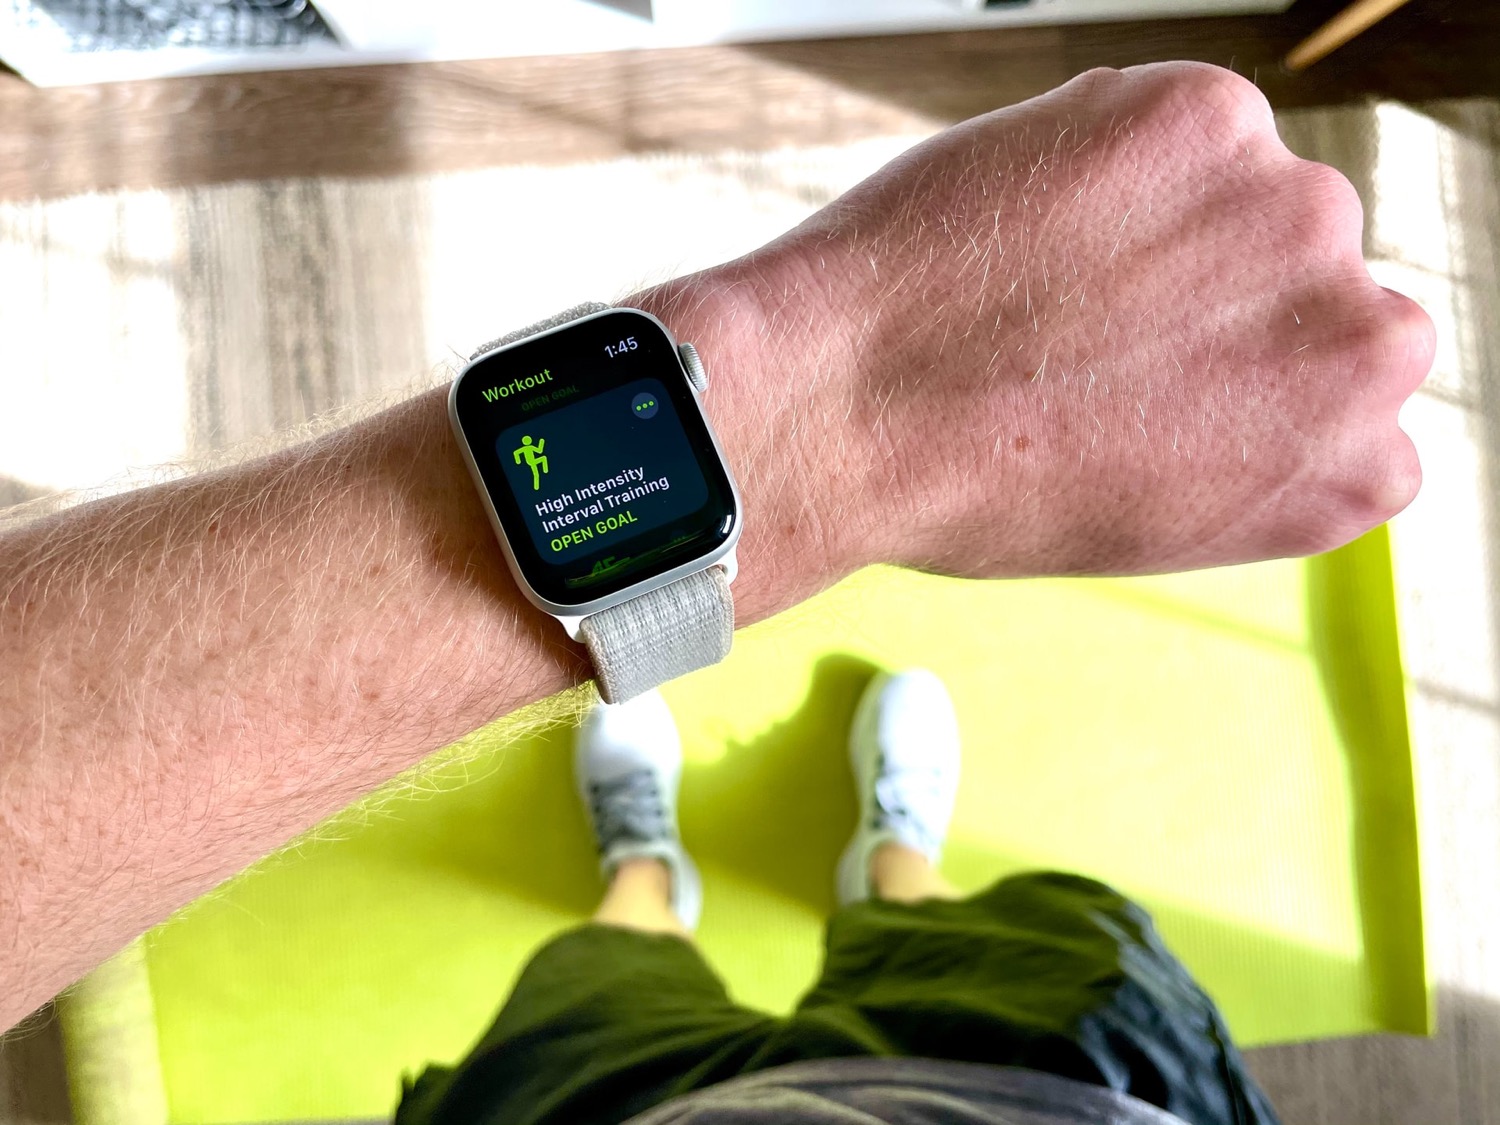 How To Add A Workout To Apple Watch